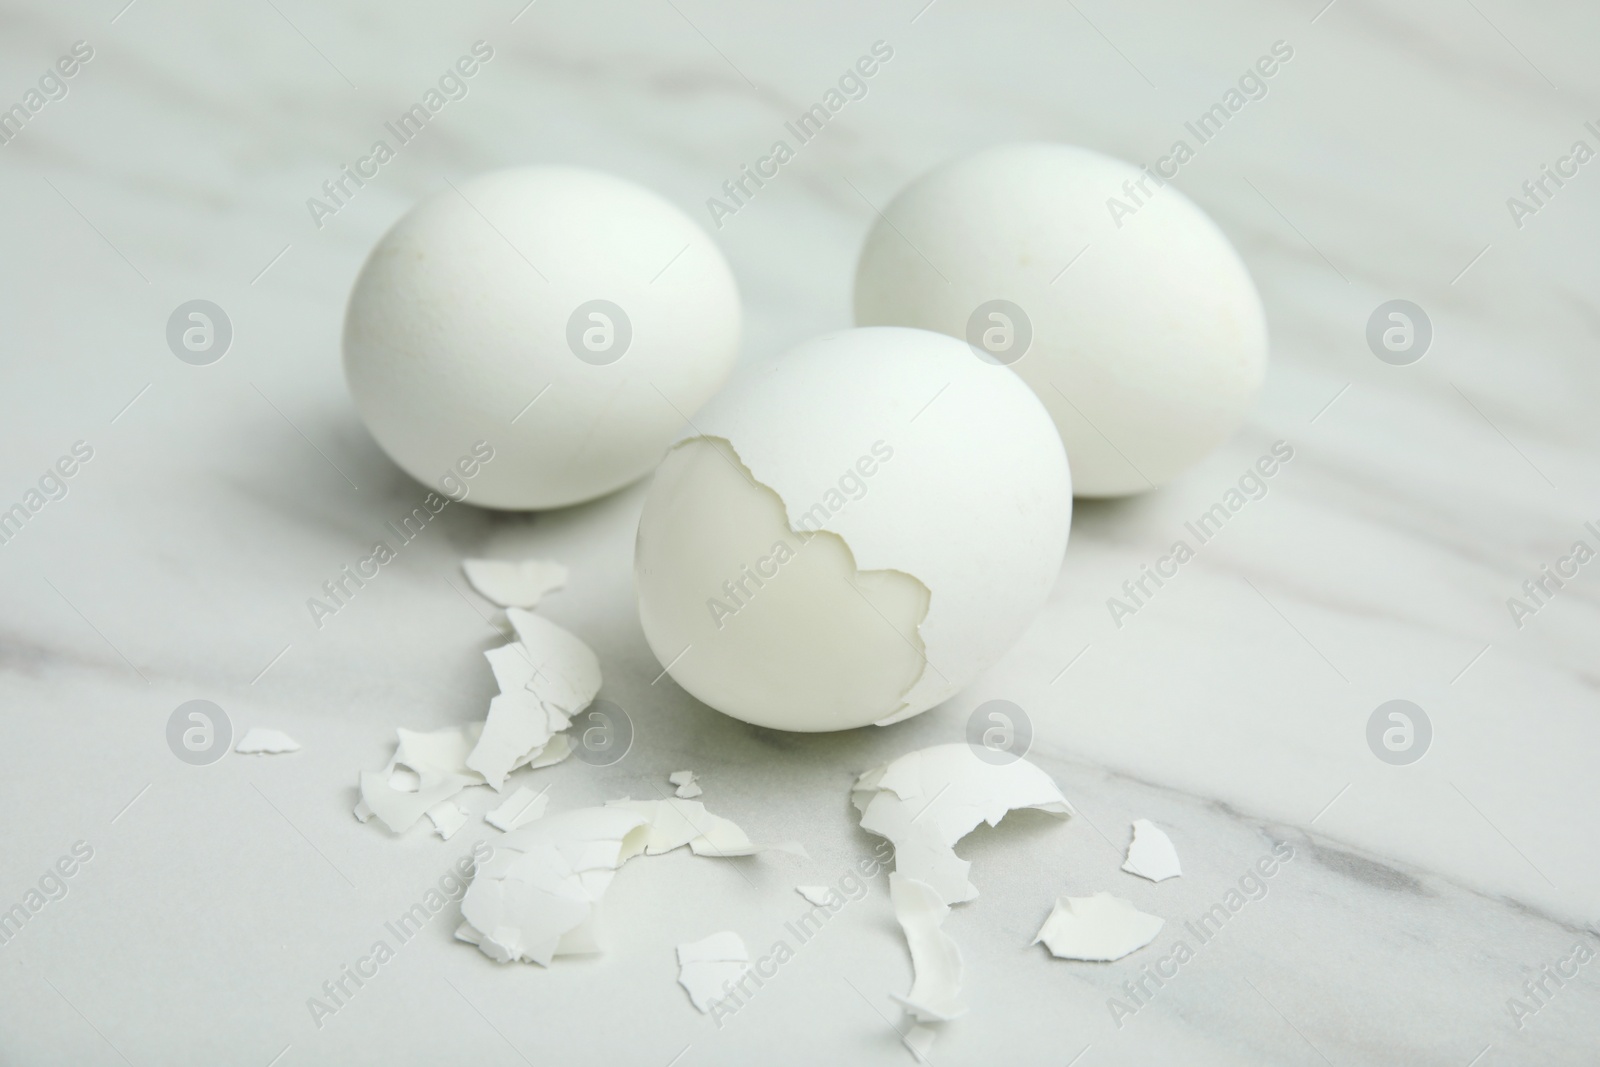 Photo of Boiled chicken eggs and pieces of shell on white marble table